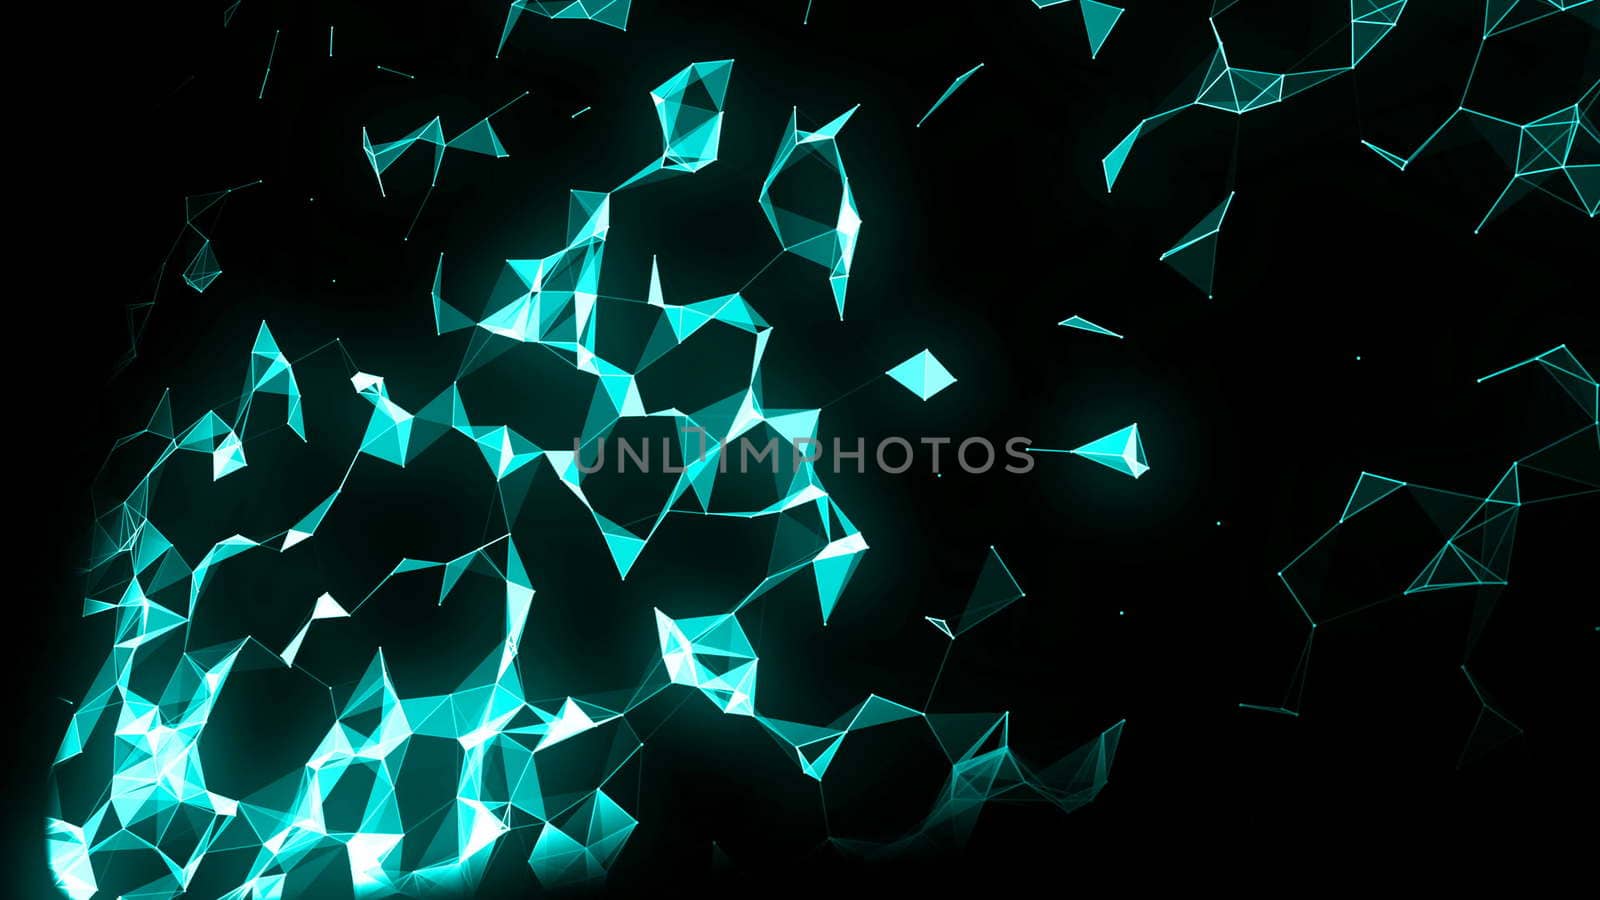 Abstract network connection background. The appearance from the bottom up by nolimit046